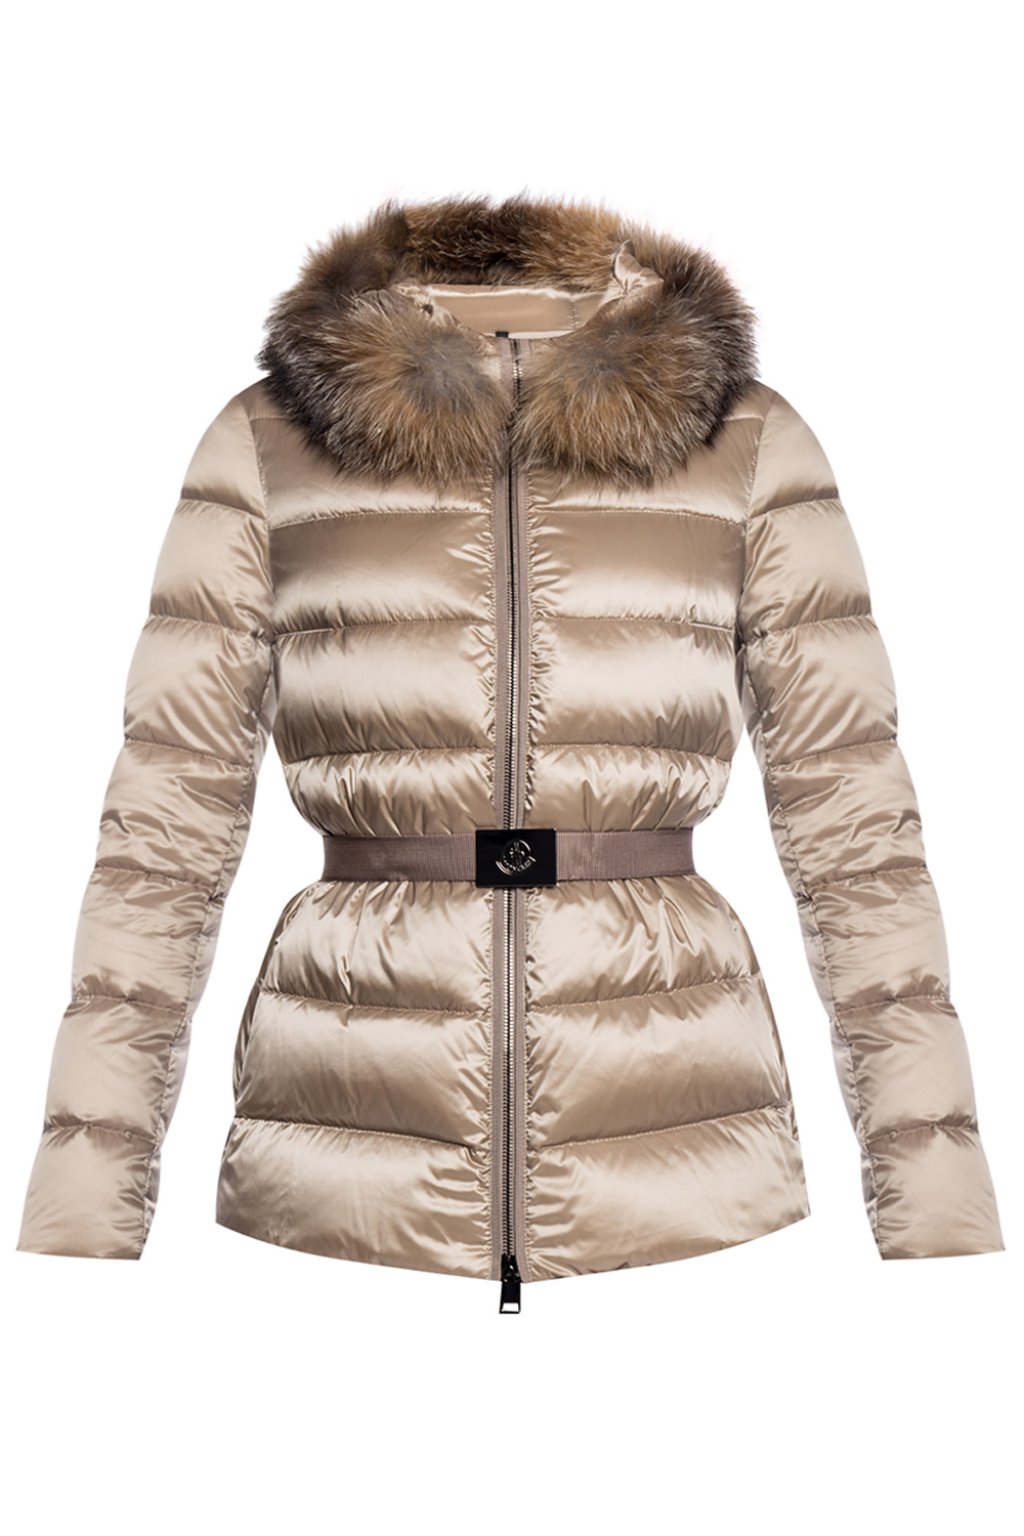 Tati' quilted down jacket Moncler 